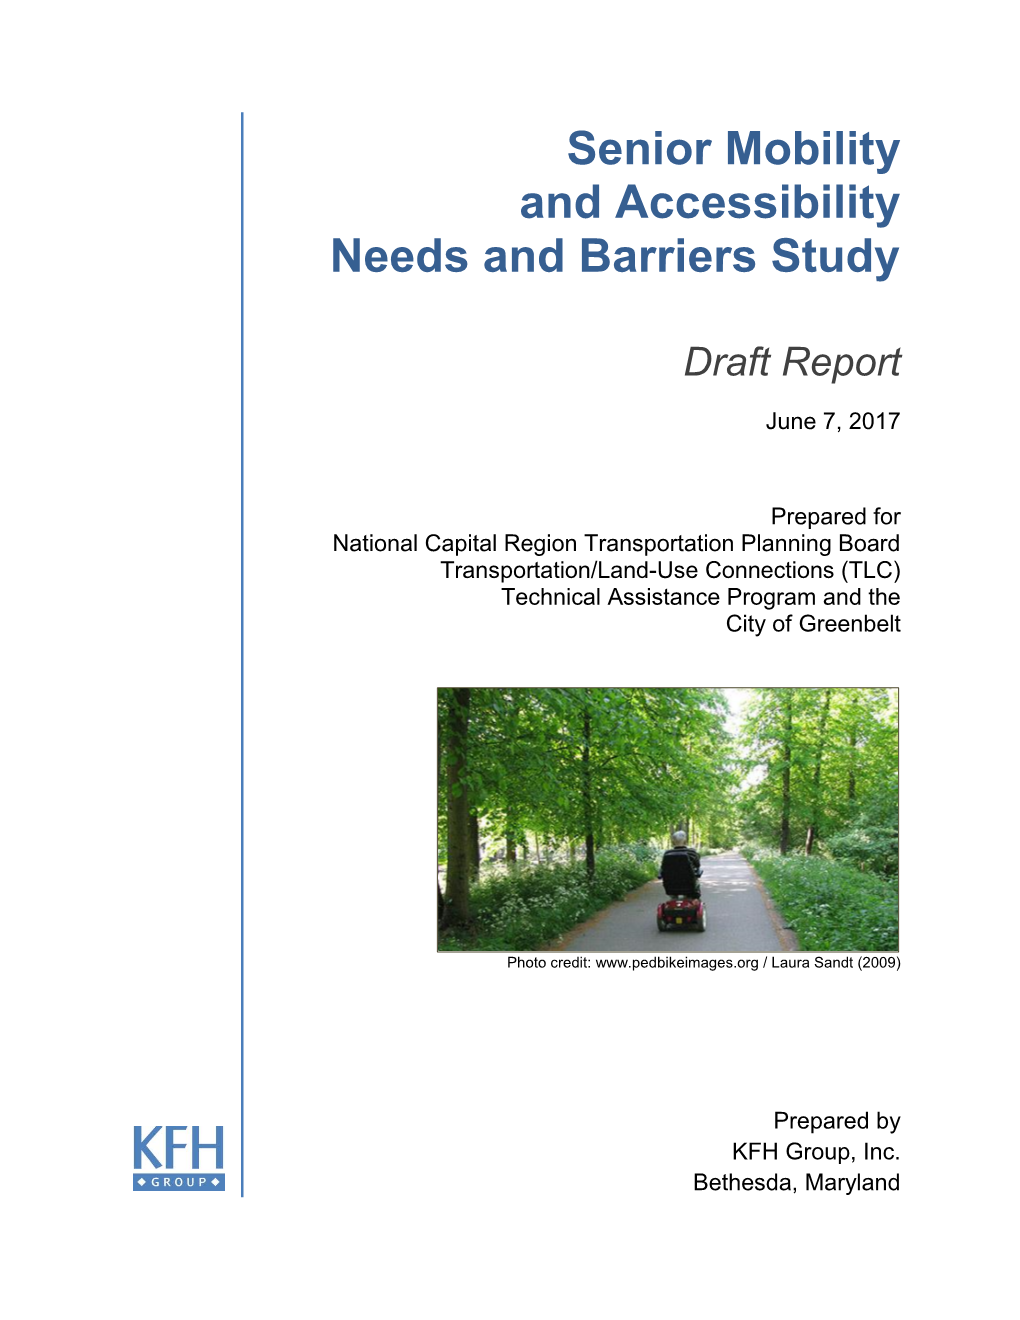 Senior Mobility and Accessibility Needs and Barriers Study